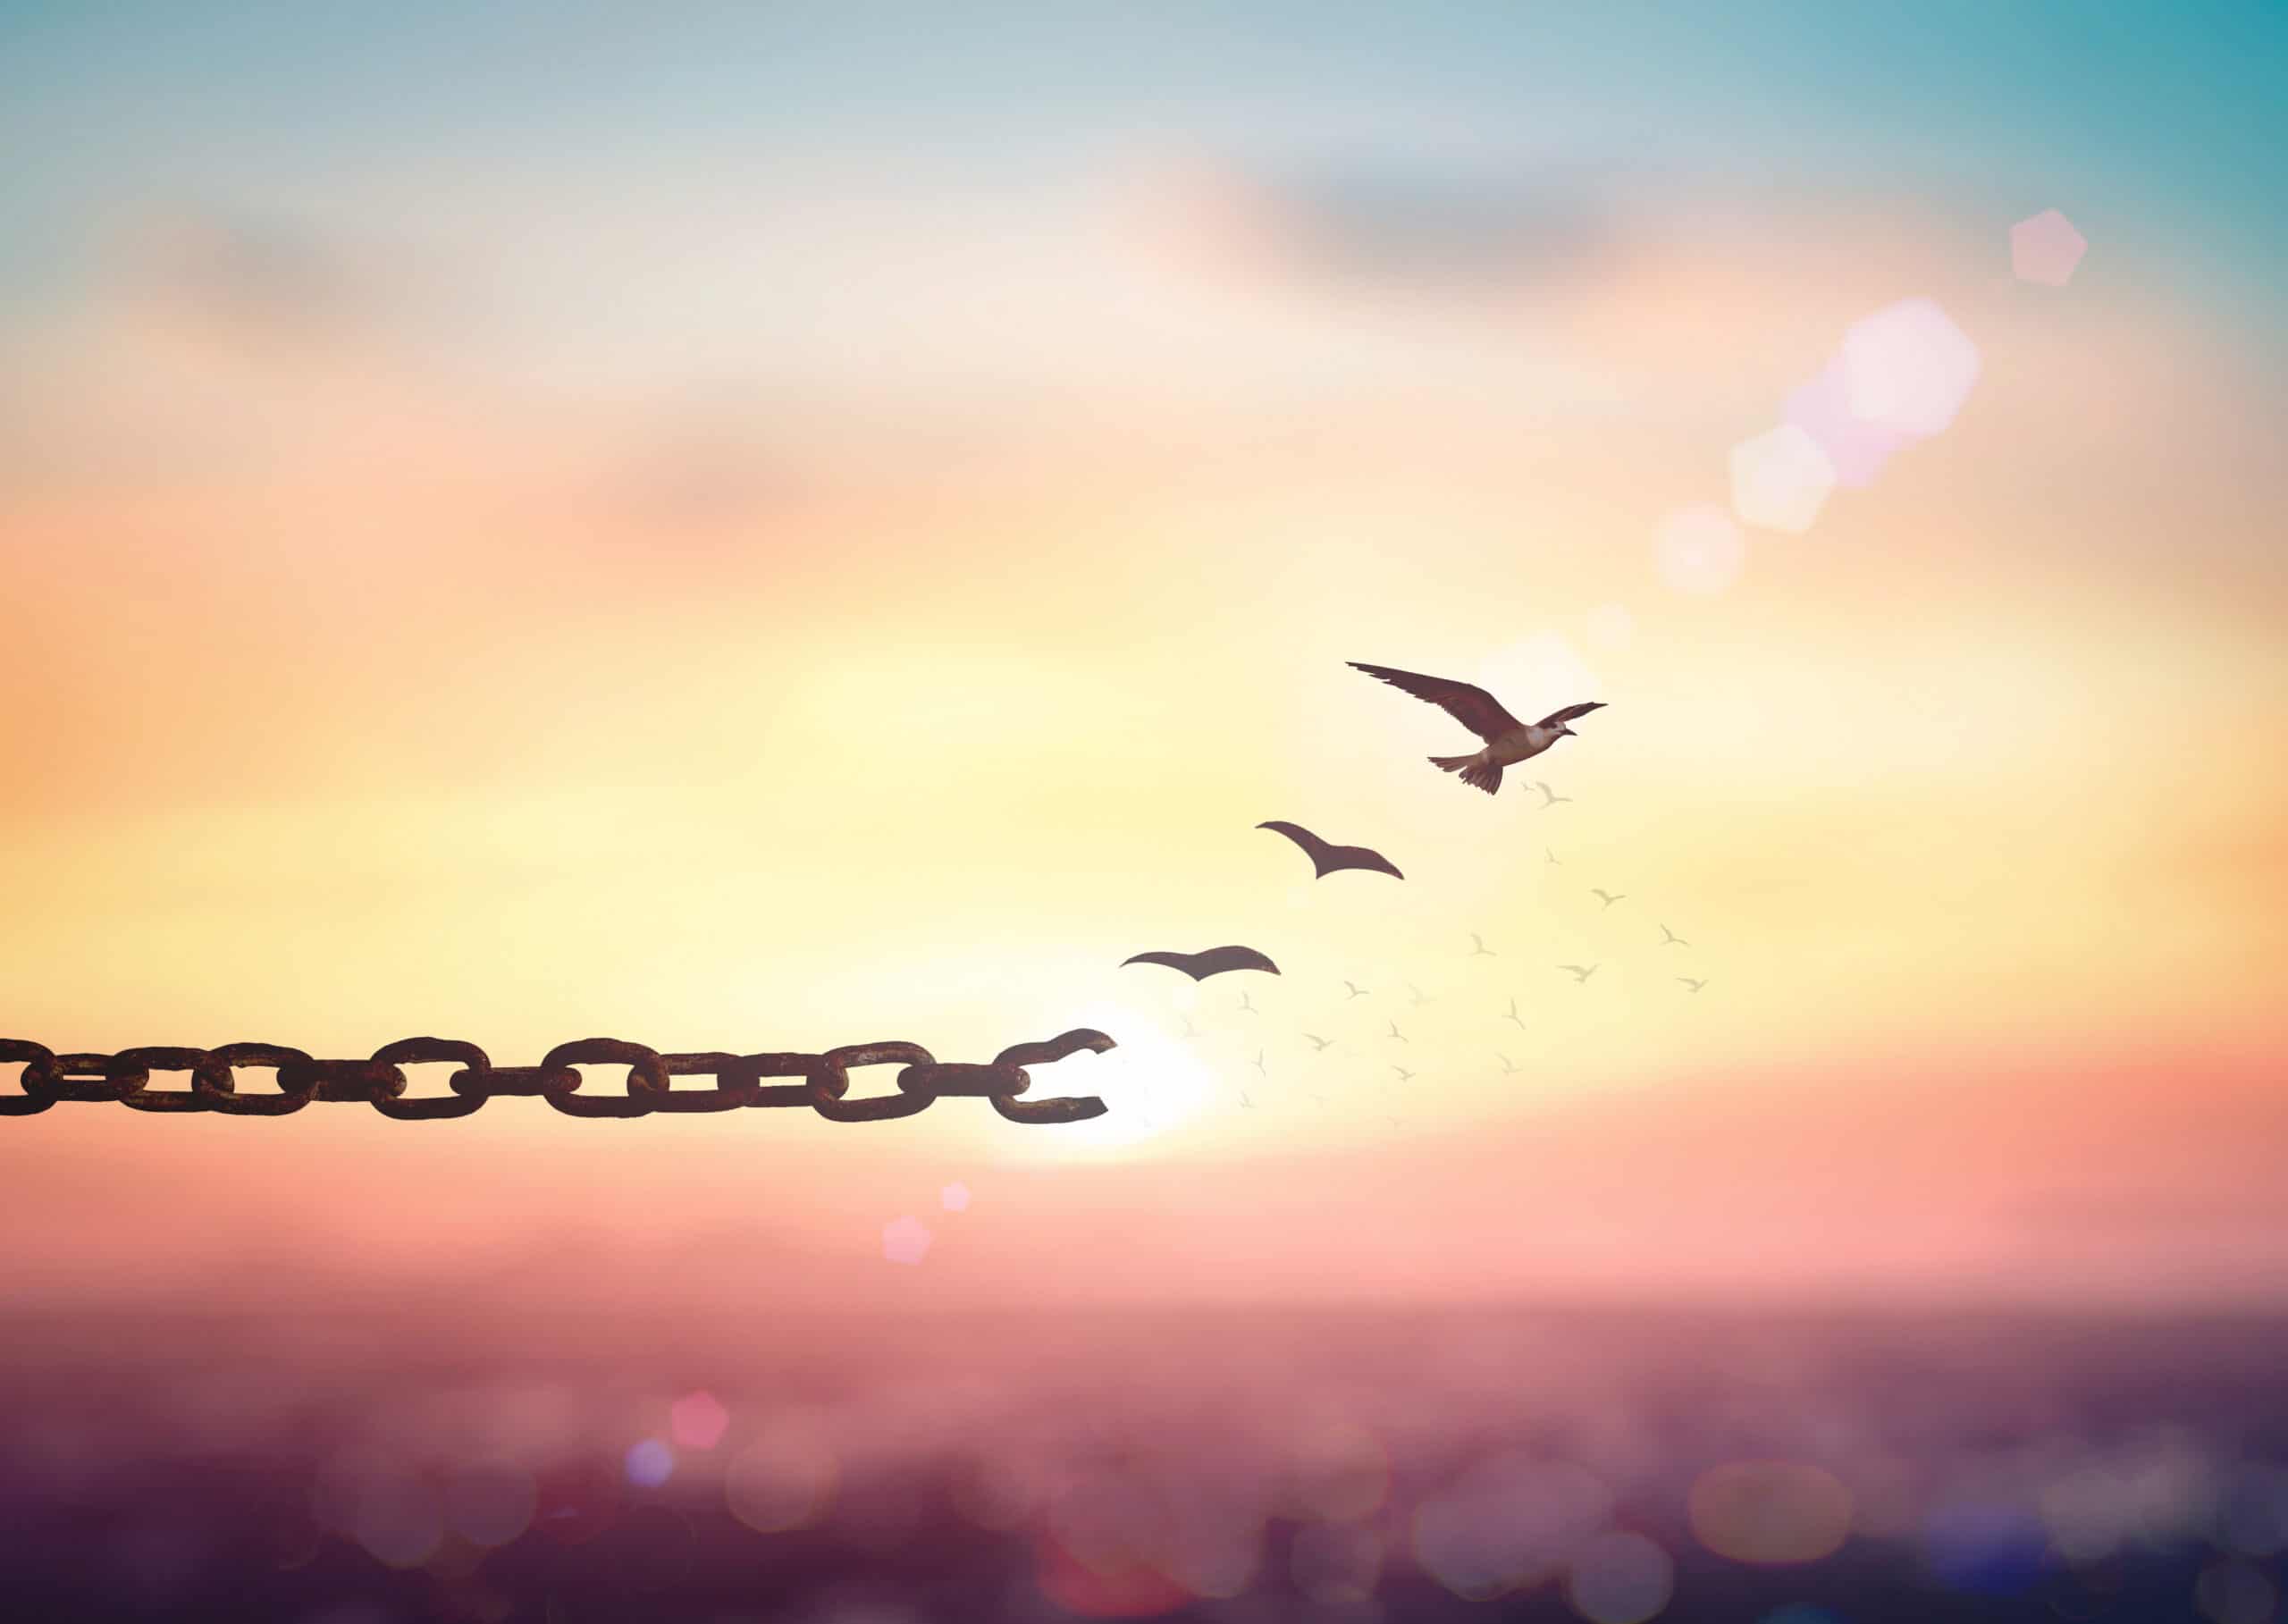 Chains and birds, podcast episode called The Desire for Dopamine: Understanding What Drives Addiction with Dr. Daniel Z. Lieberman MD, Mike Long & Travis Lupick